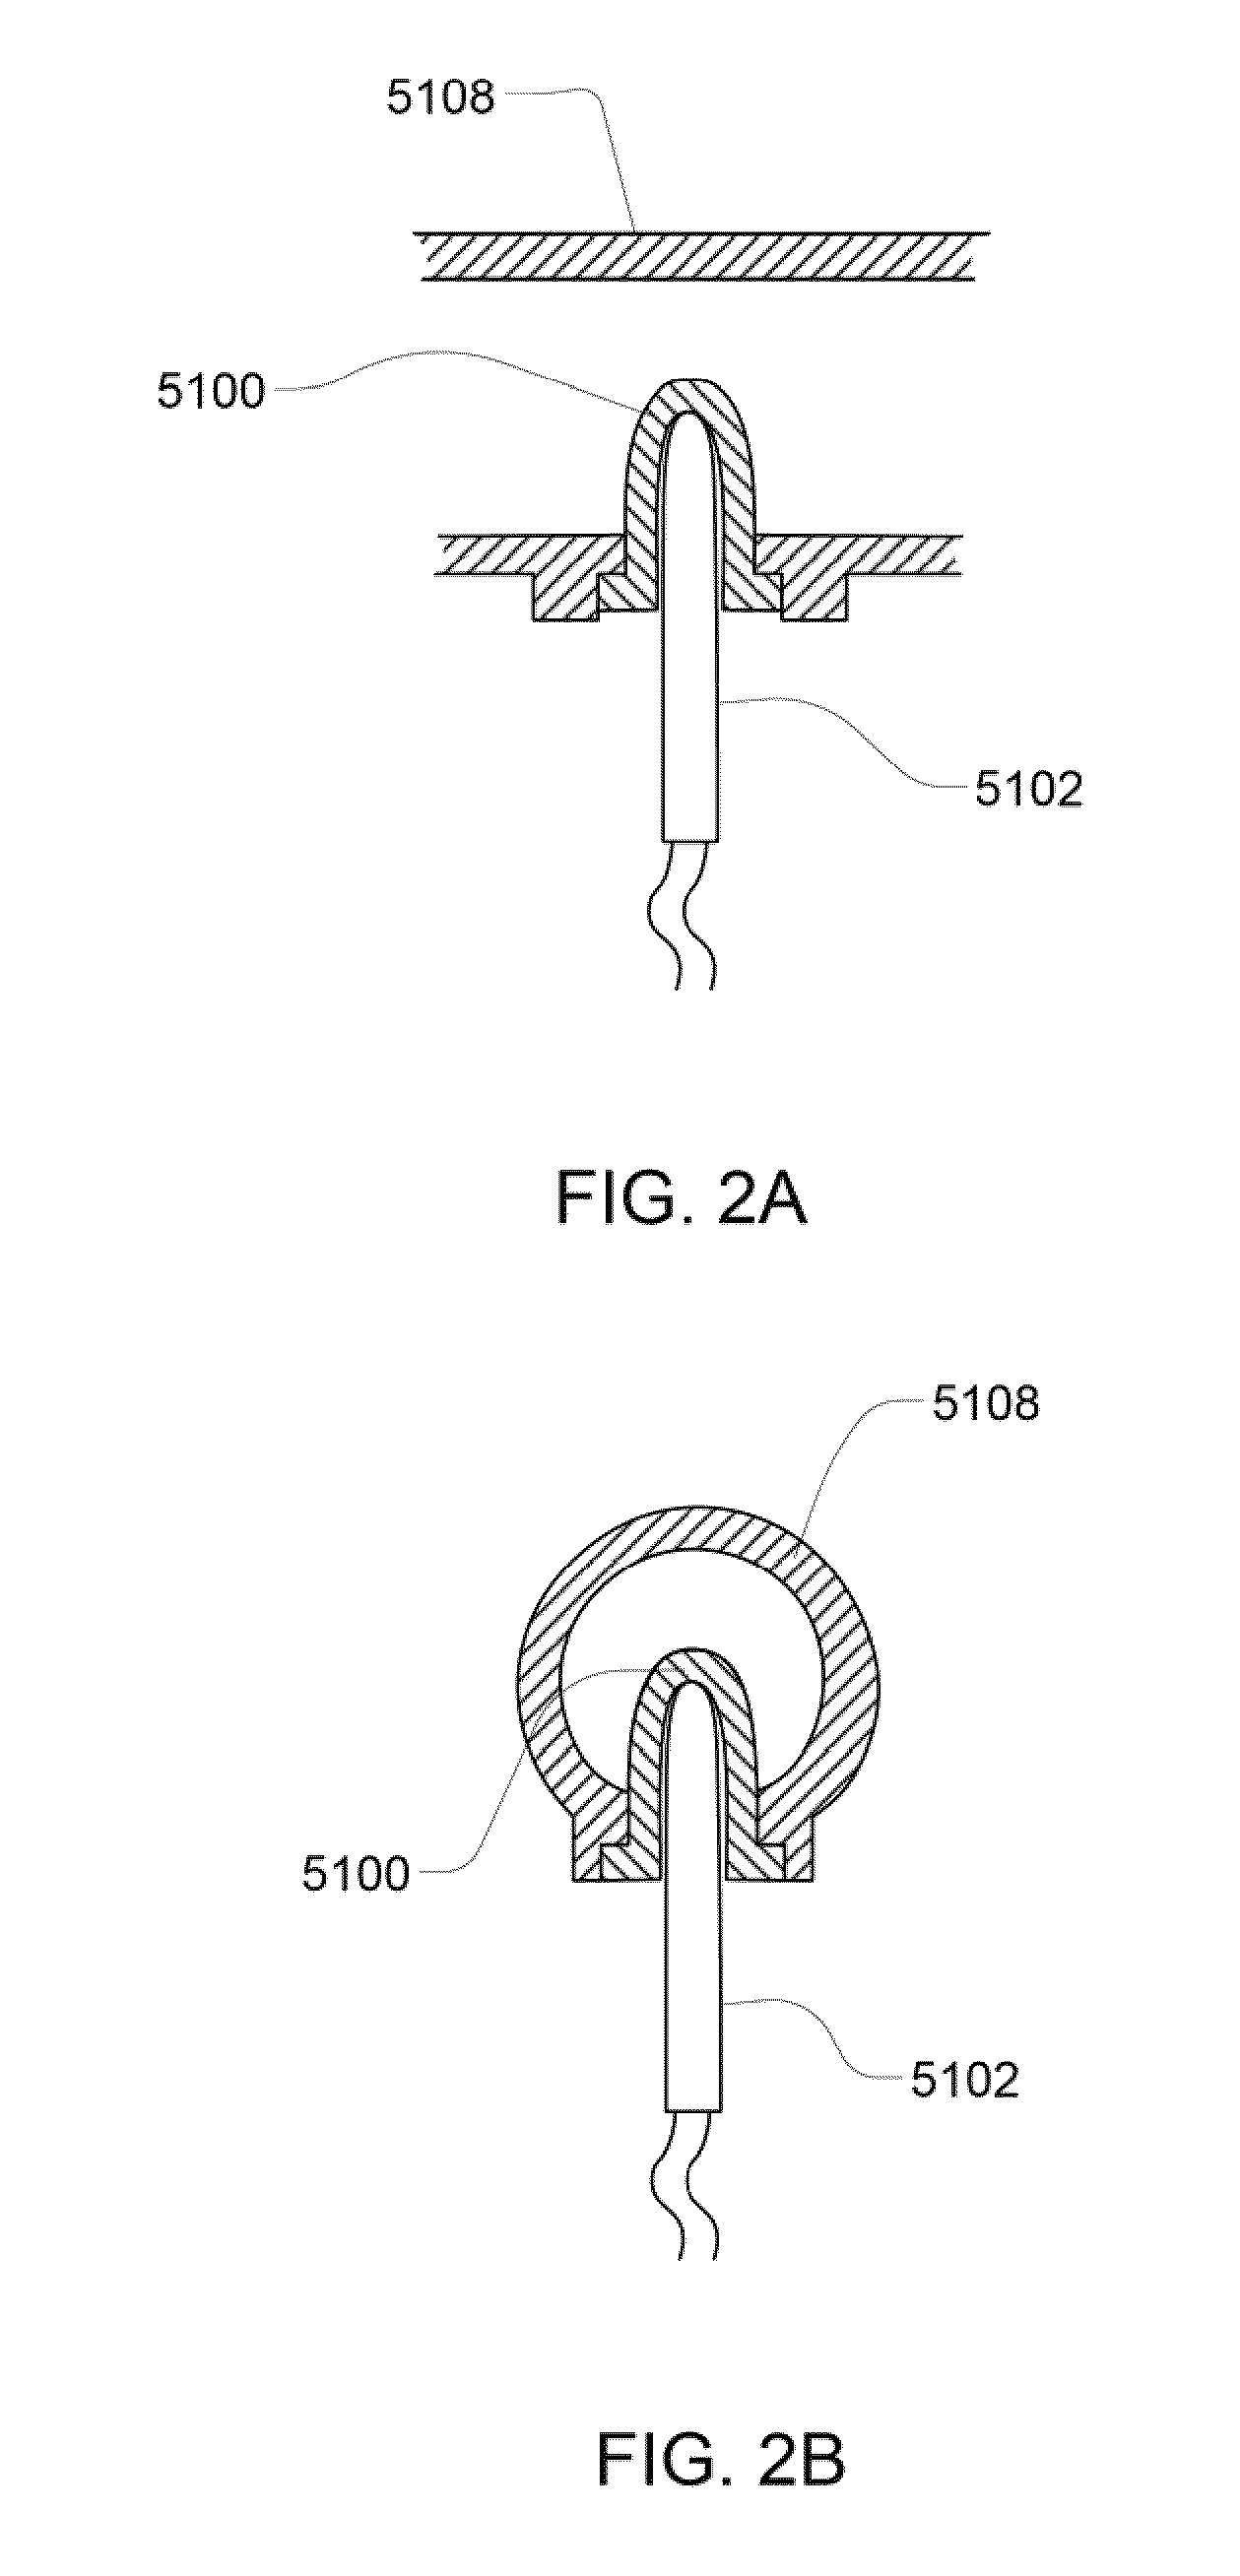 Sensor apparatus systems, devices and methods